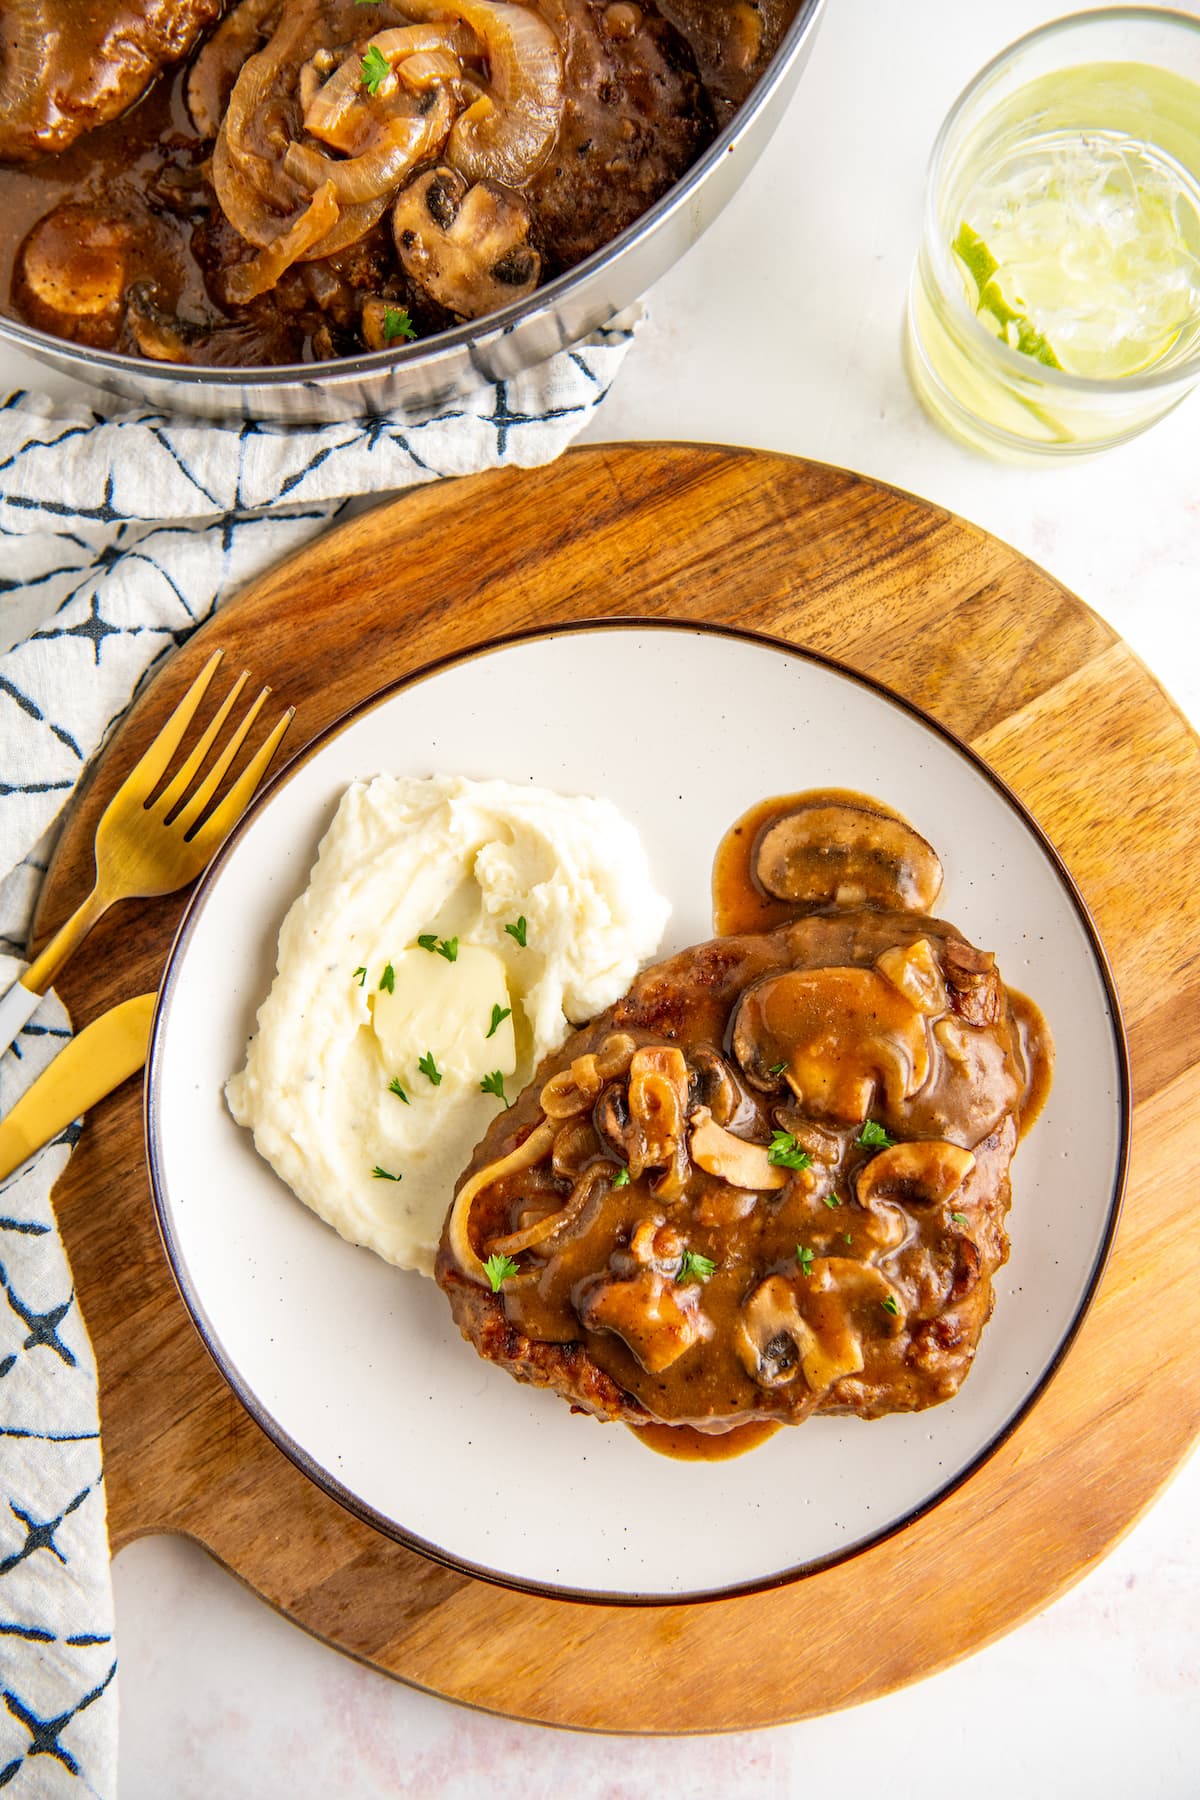 Overhead view of a plate with a steak smothered in mushrooms and gravy, and a pile of mashed potatoes, next to a fork